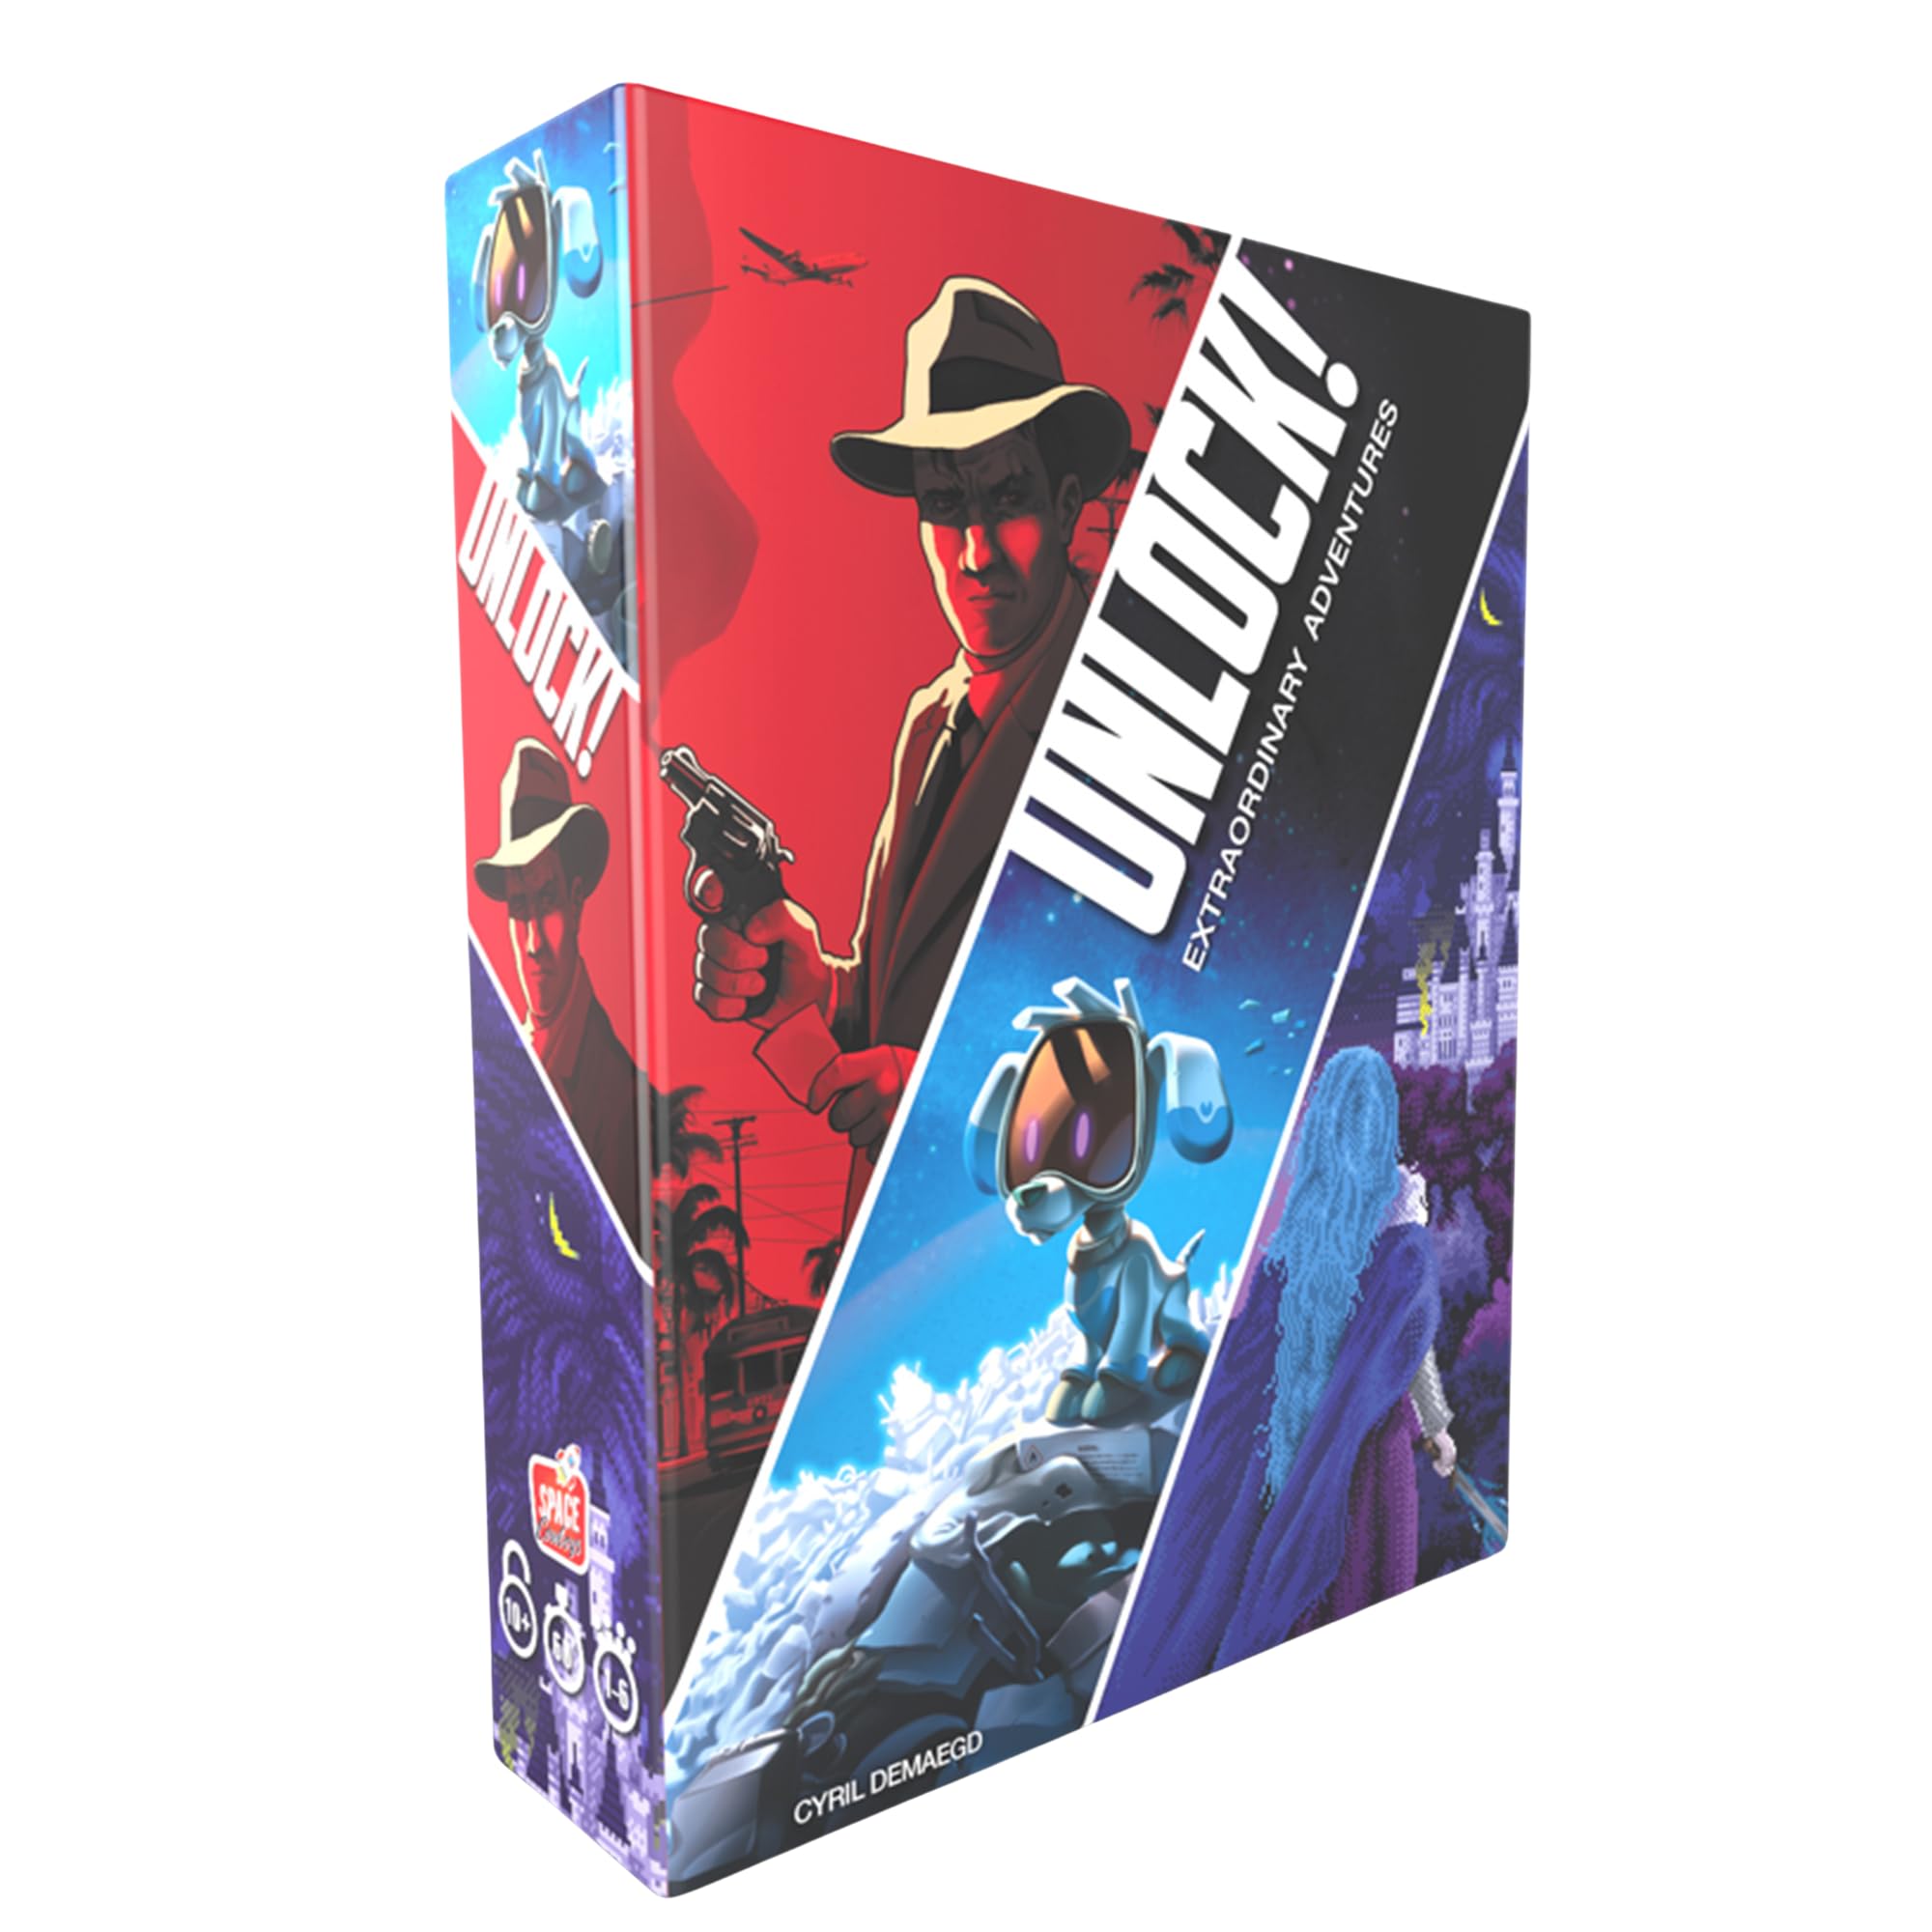 Space Cowboys Unlock! Extraordinary Adventures Card Game - Escape Room-Inspired Cooperative Adventure, Fun Family Game for Kids and Adults, Ages 10+, 1-6 Players, 1 Hour Playtime, Made